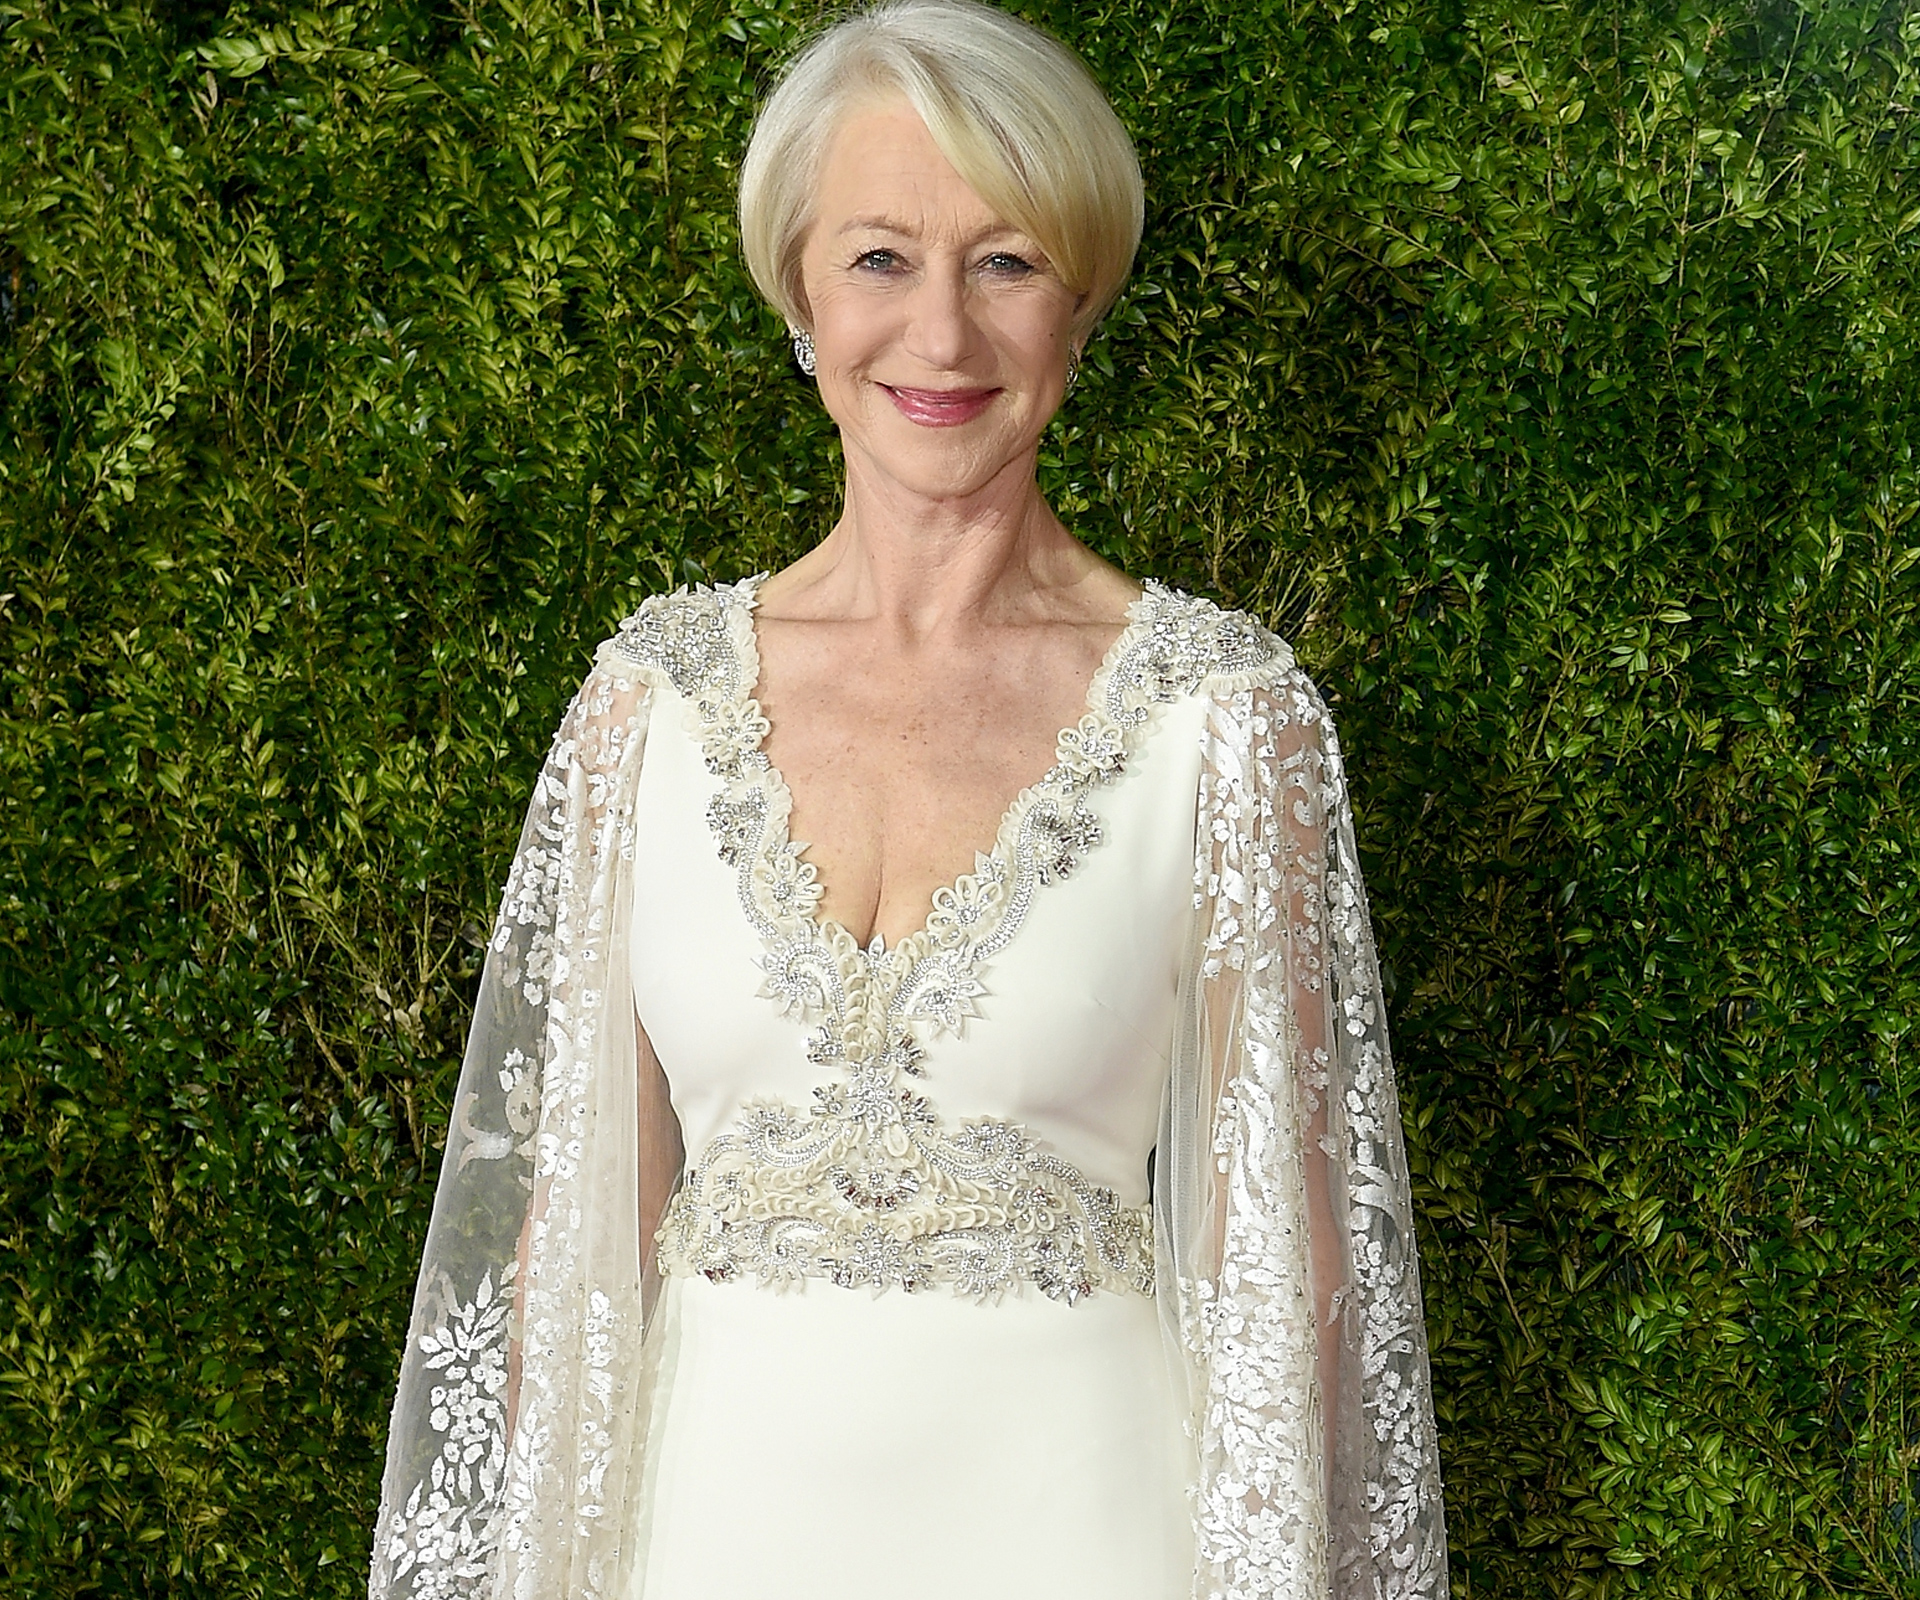 Helen Mirren says the one thing we all think about moisturiser